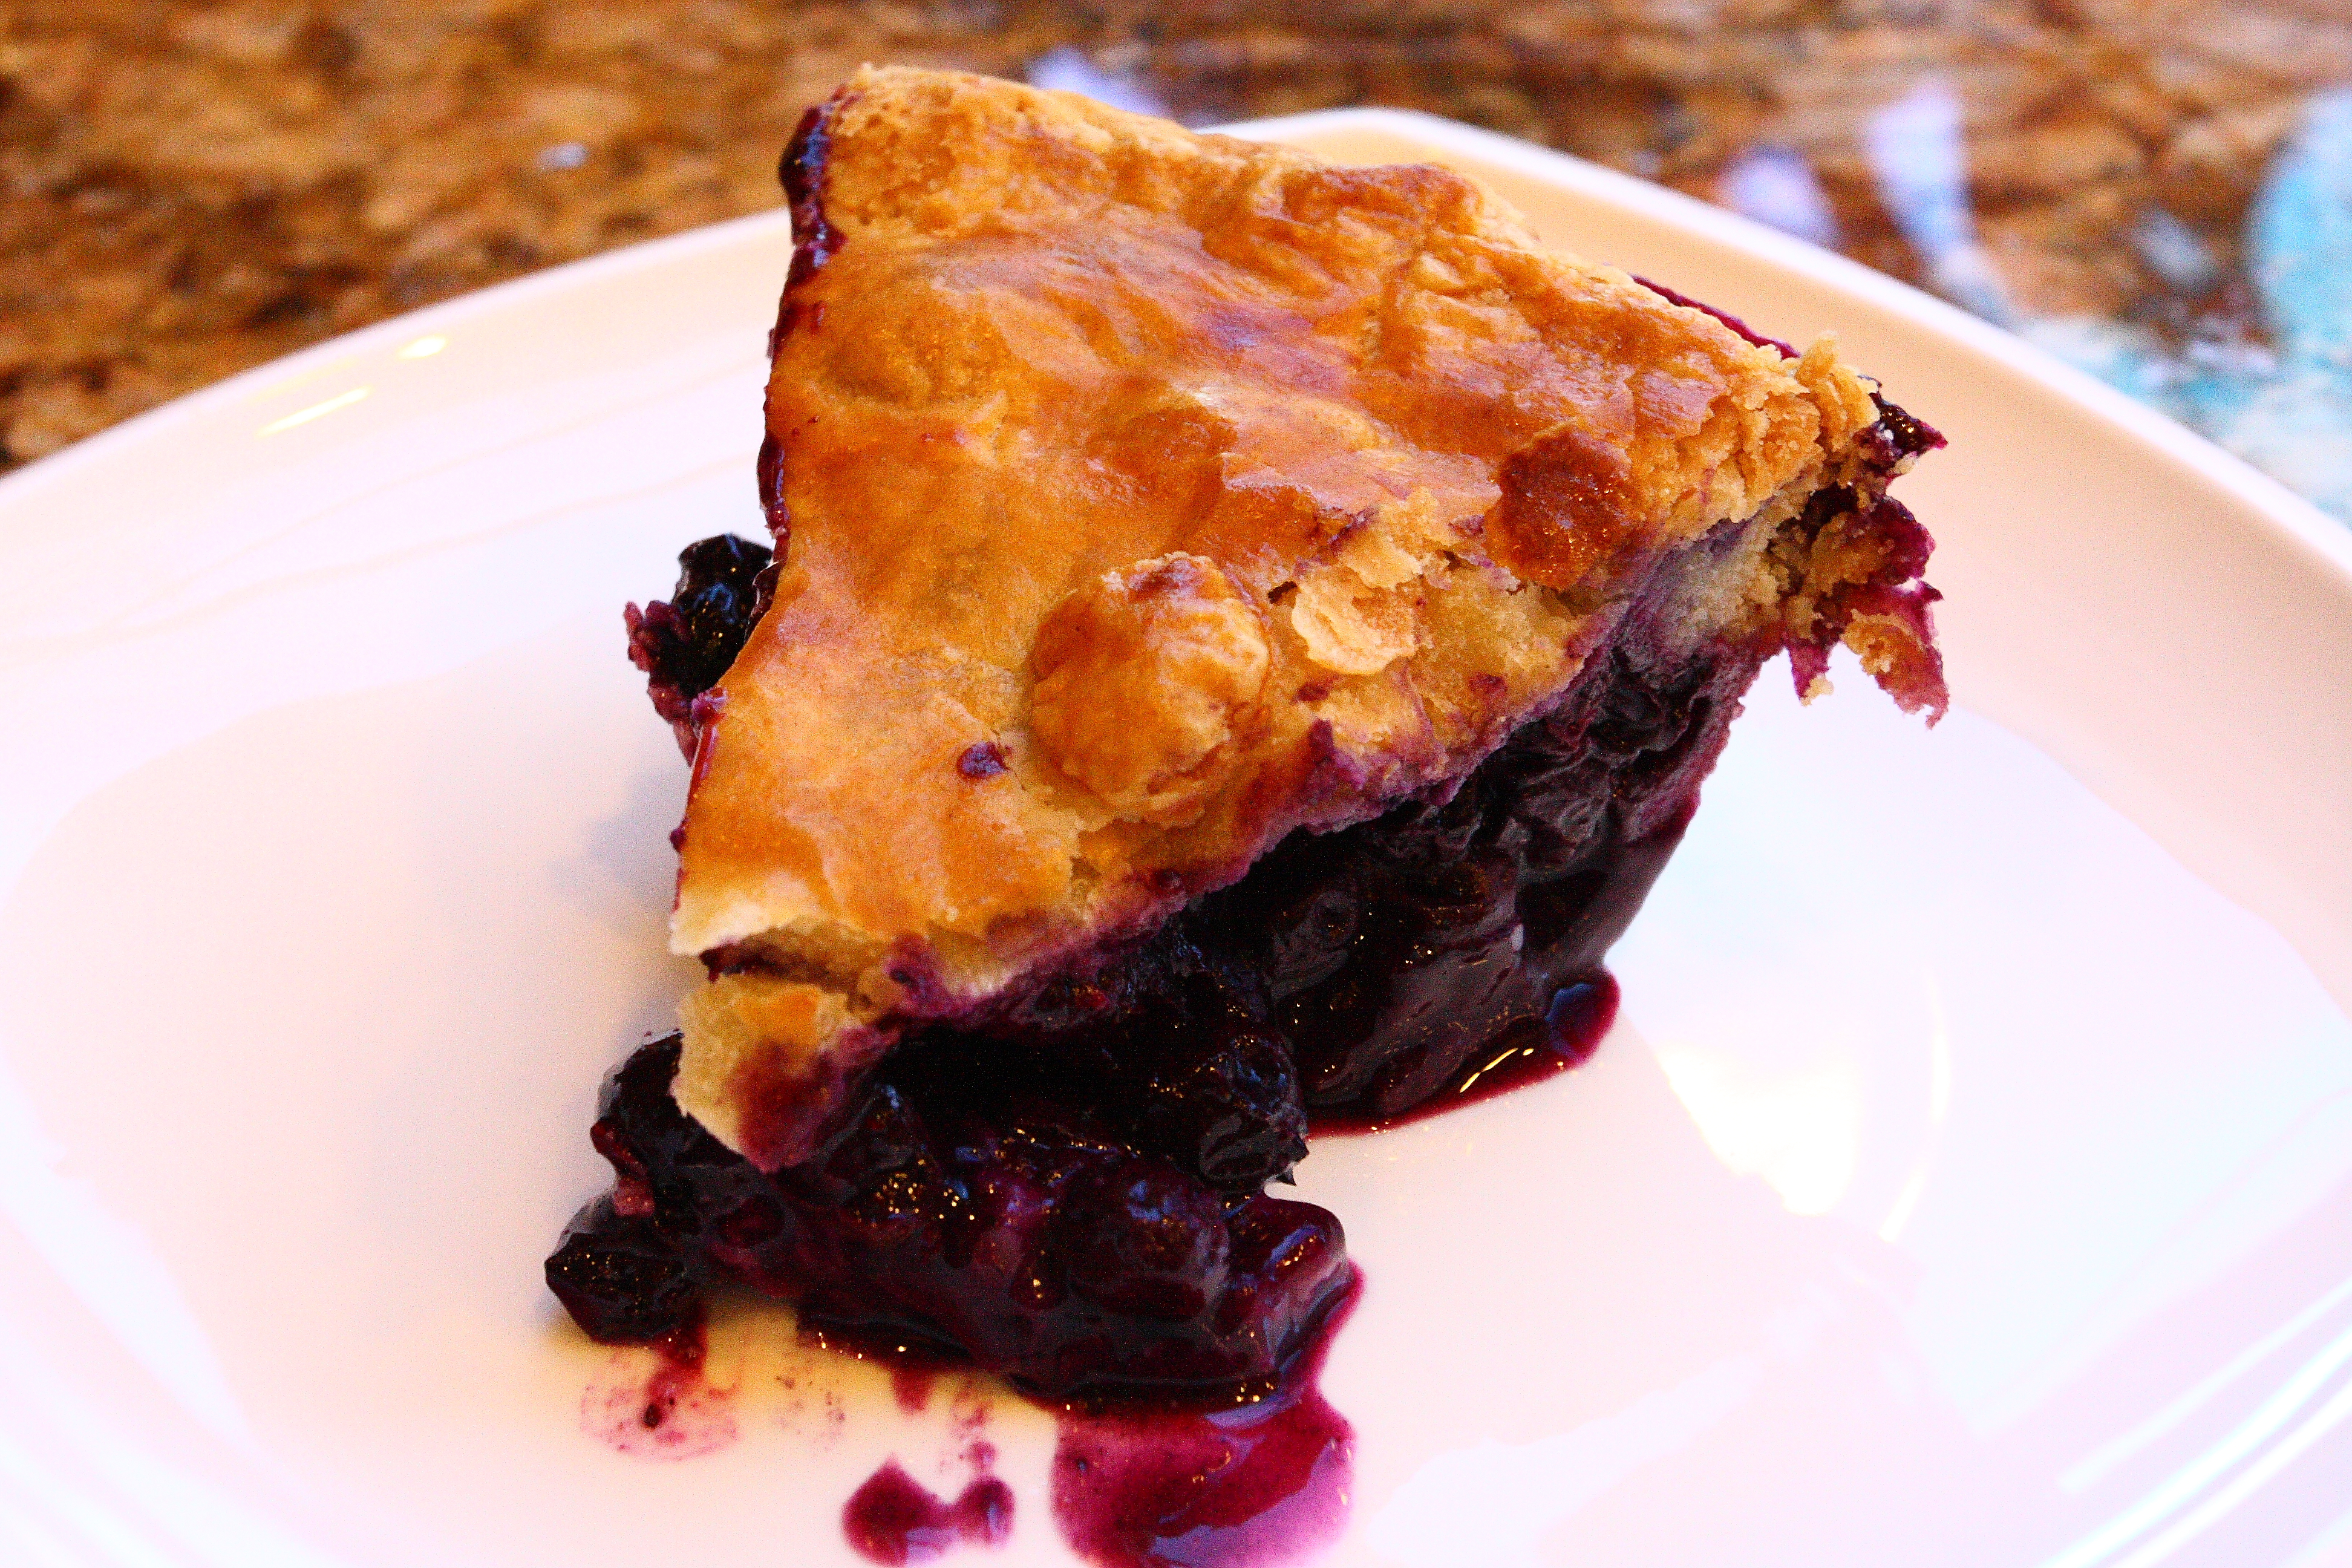 A slice of blueberry pie on a white plate.